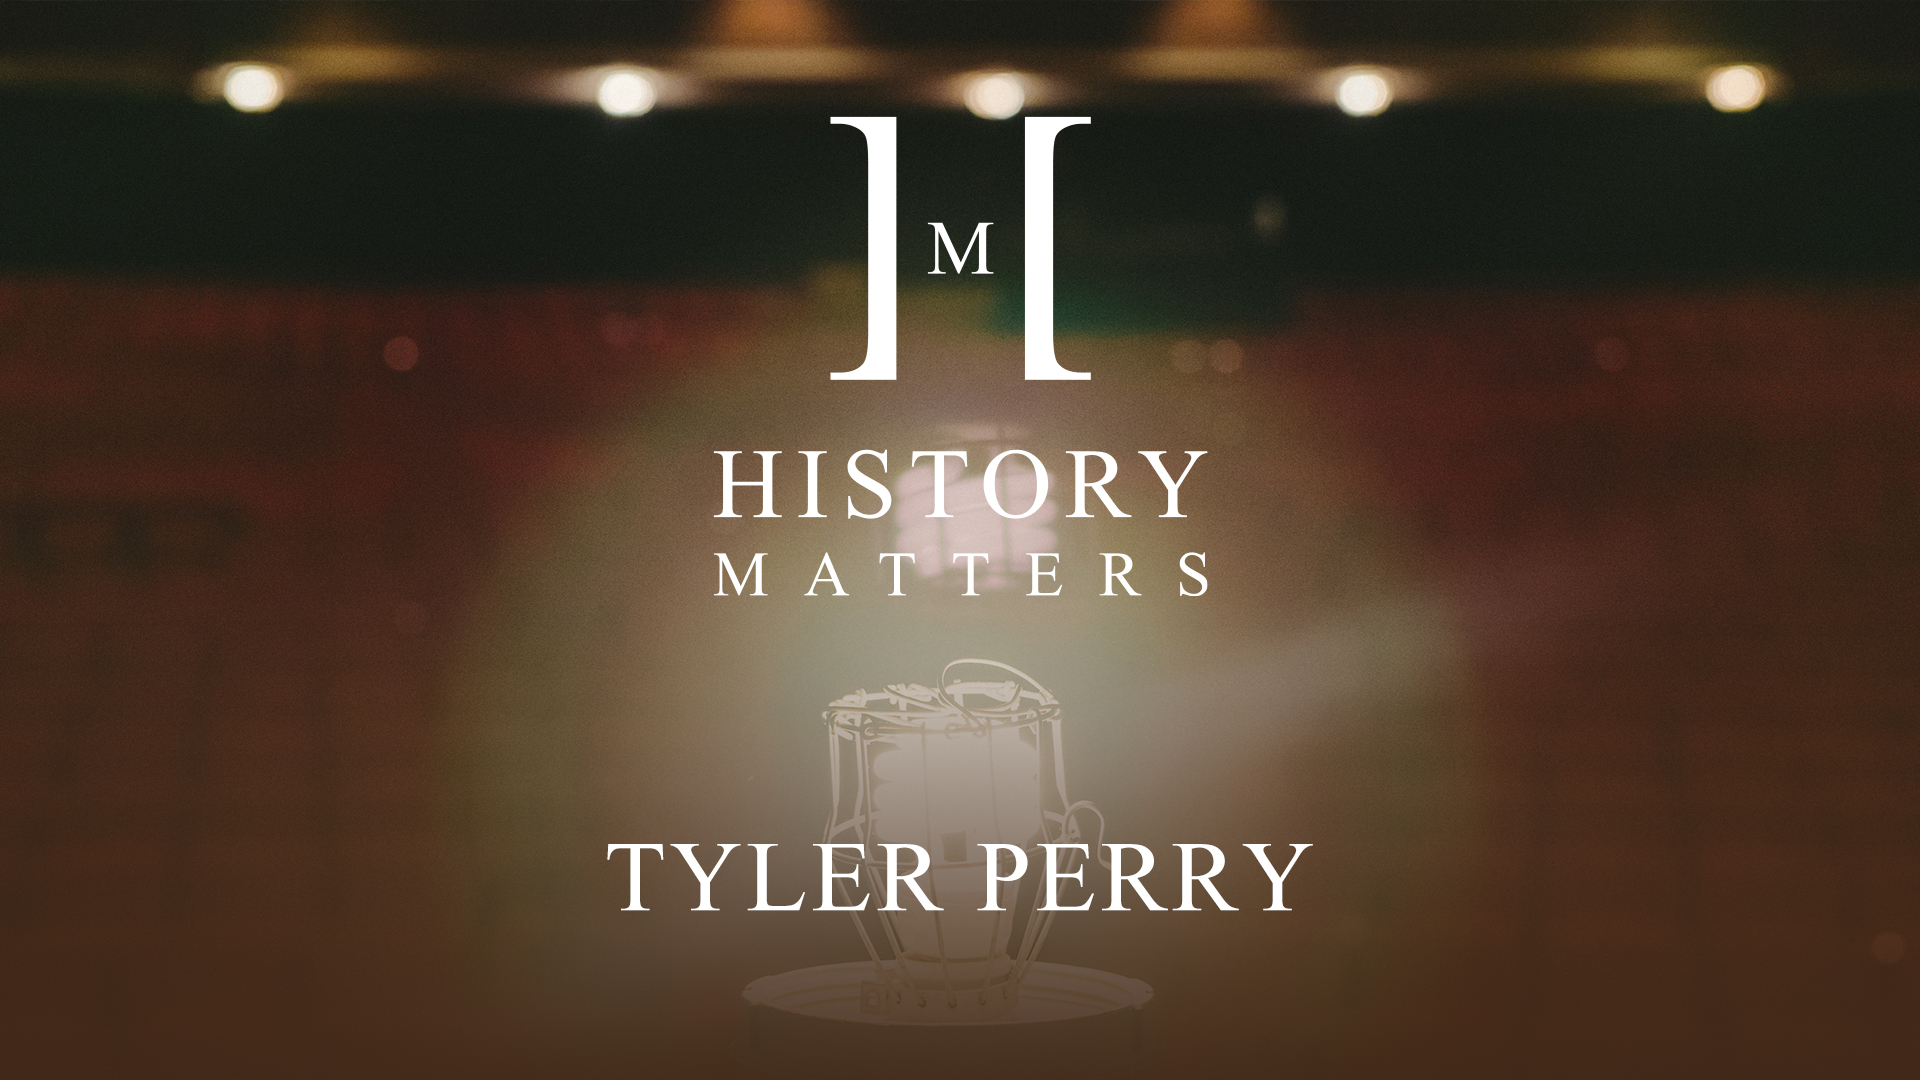 History Matters Tyler Perry by Amber Fox